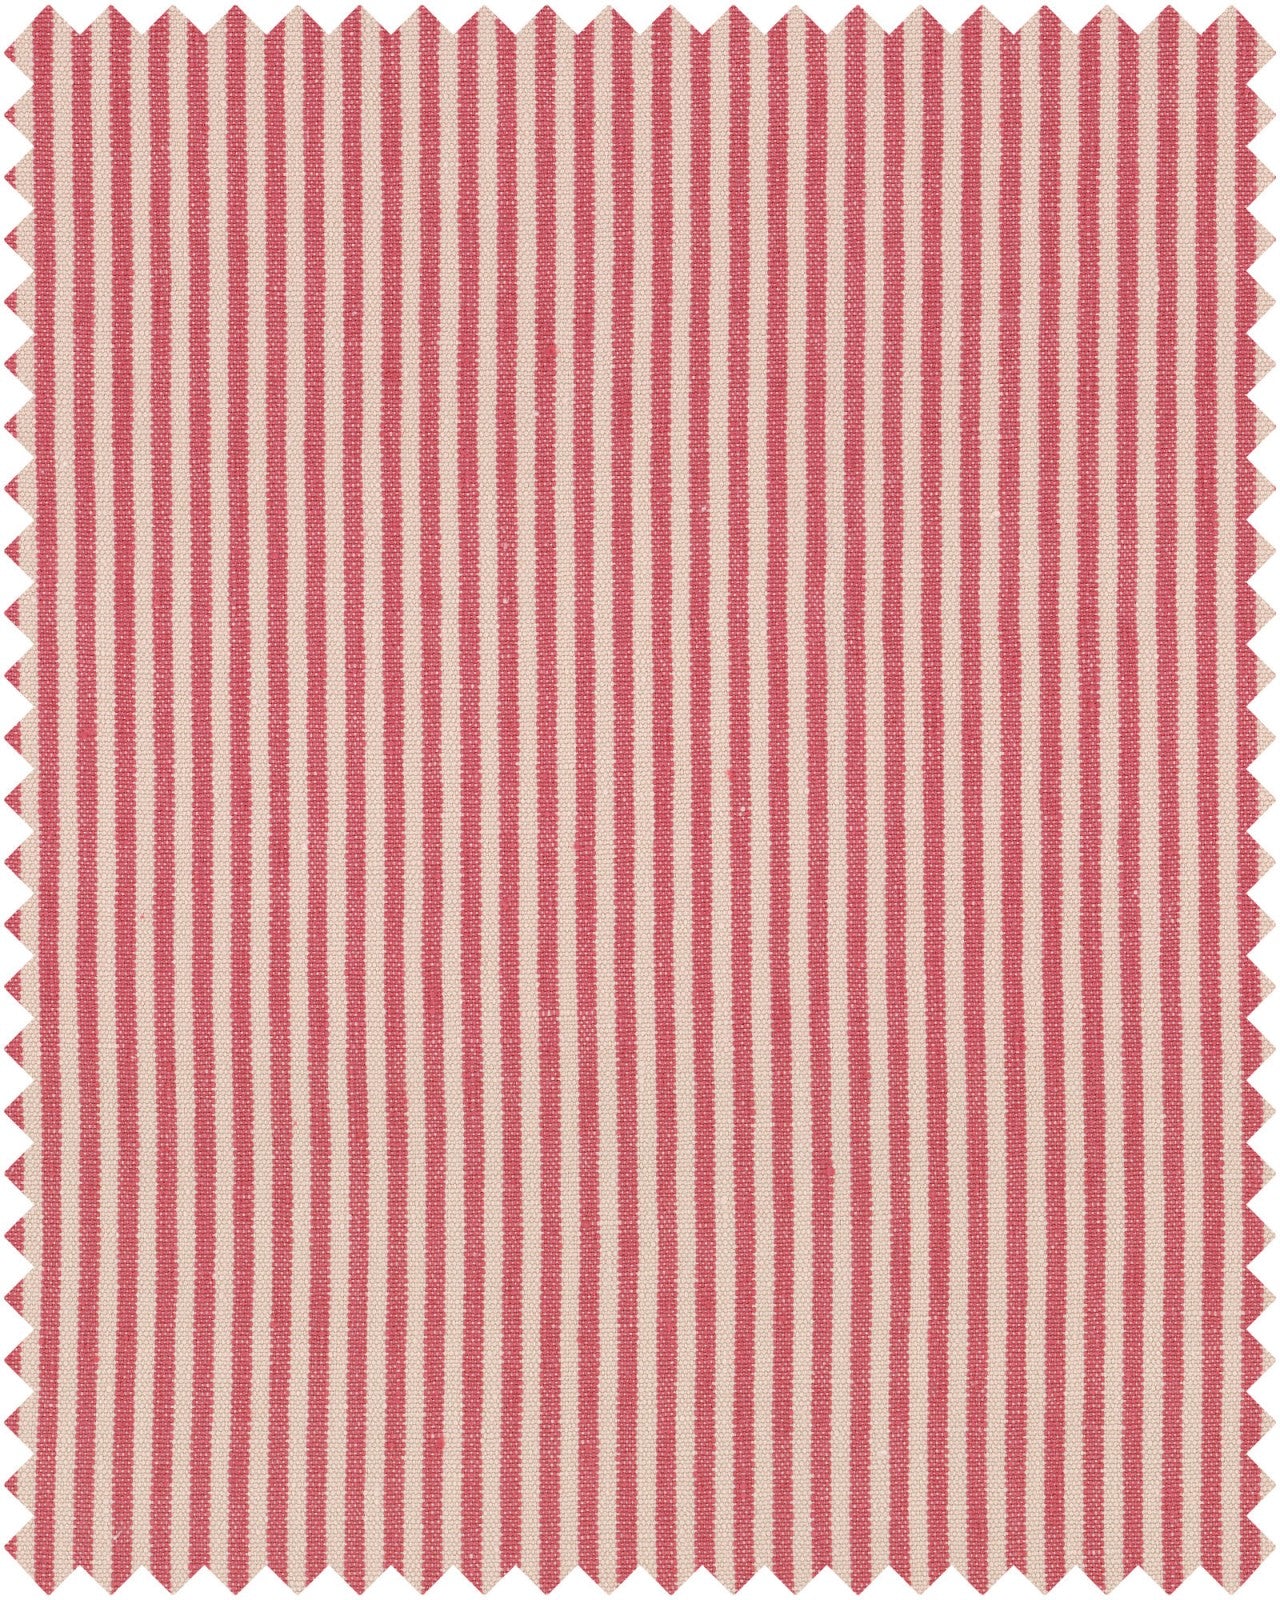 Rhubarb Stripe Heavy Linen fabric in red white color - pattern number FB00054 - by Mind The Gap in the Transylvanian Roots collection